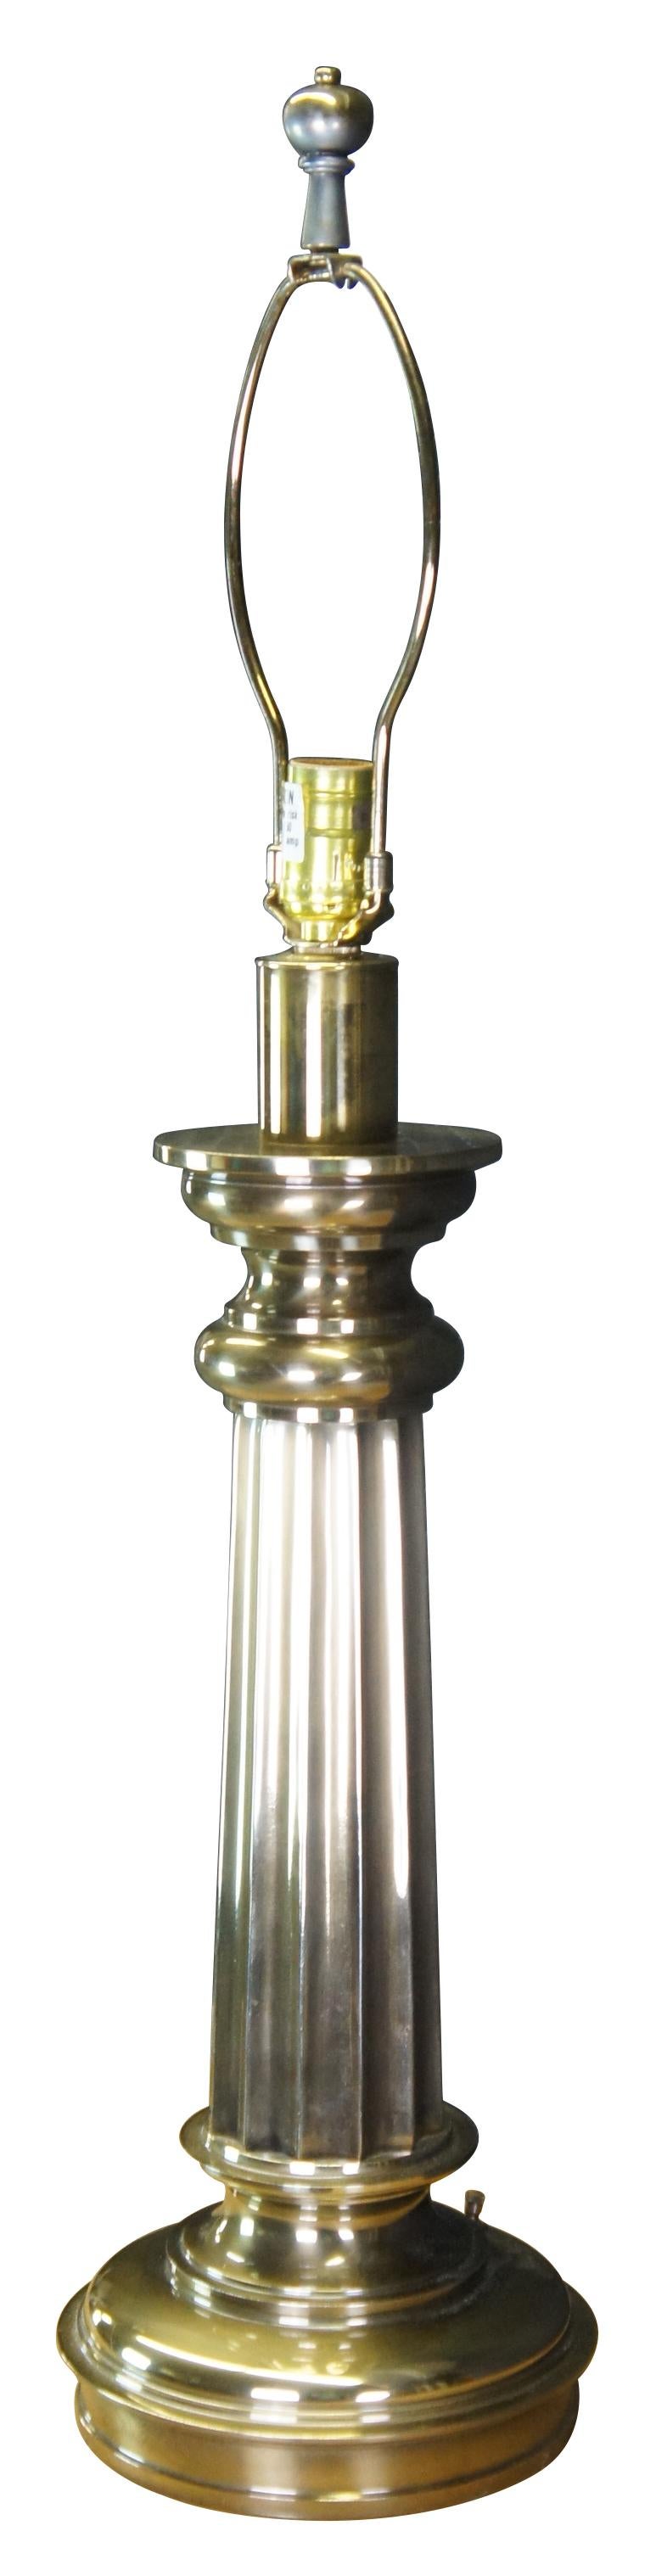 Vintage Stiffel table lamp. Made from brass with fluted column at the center.